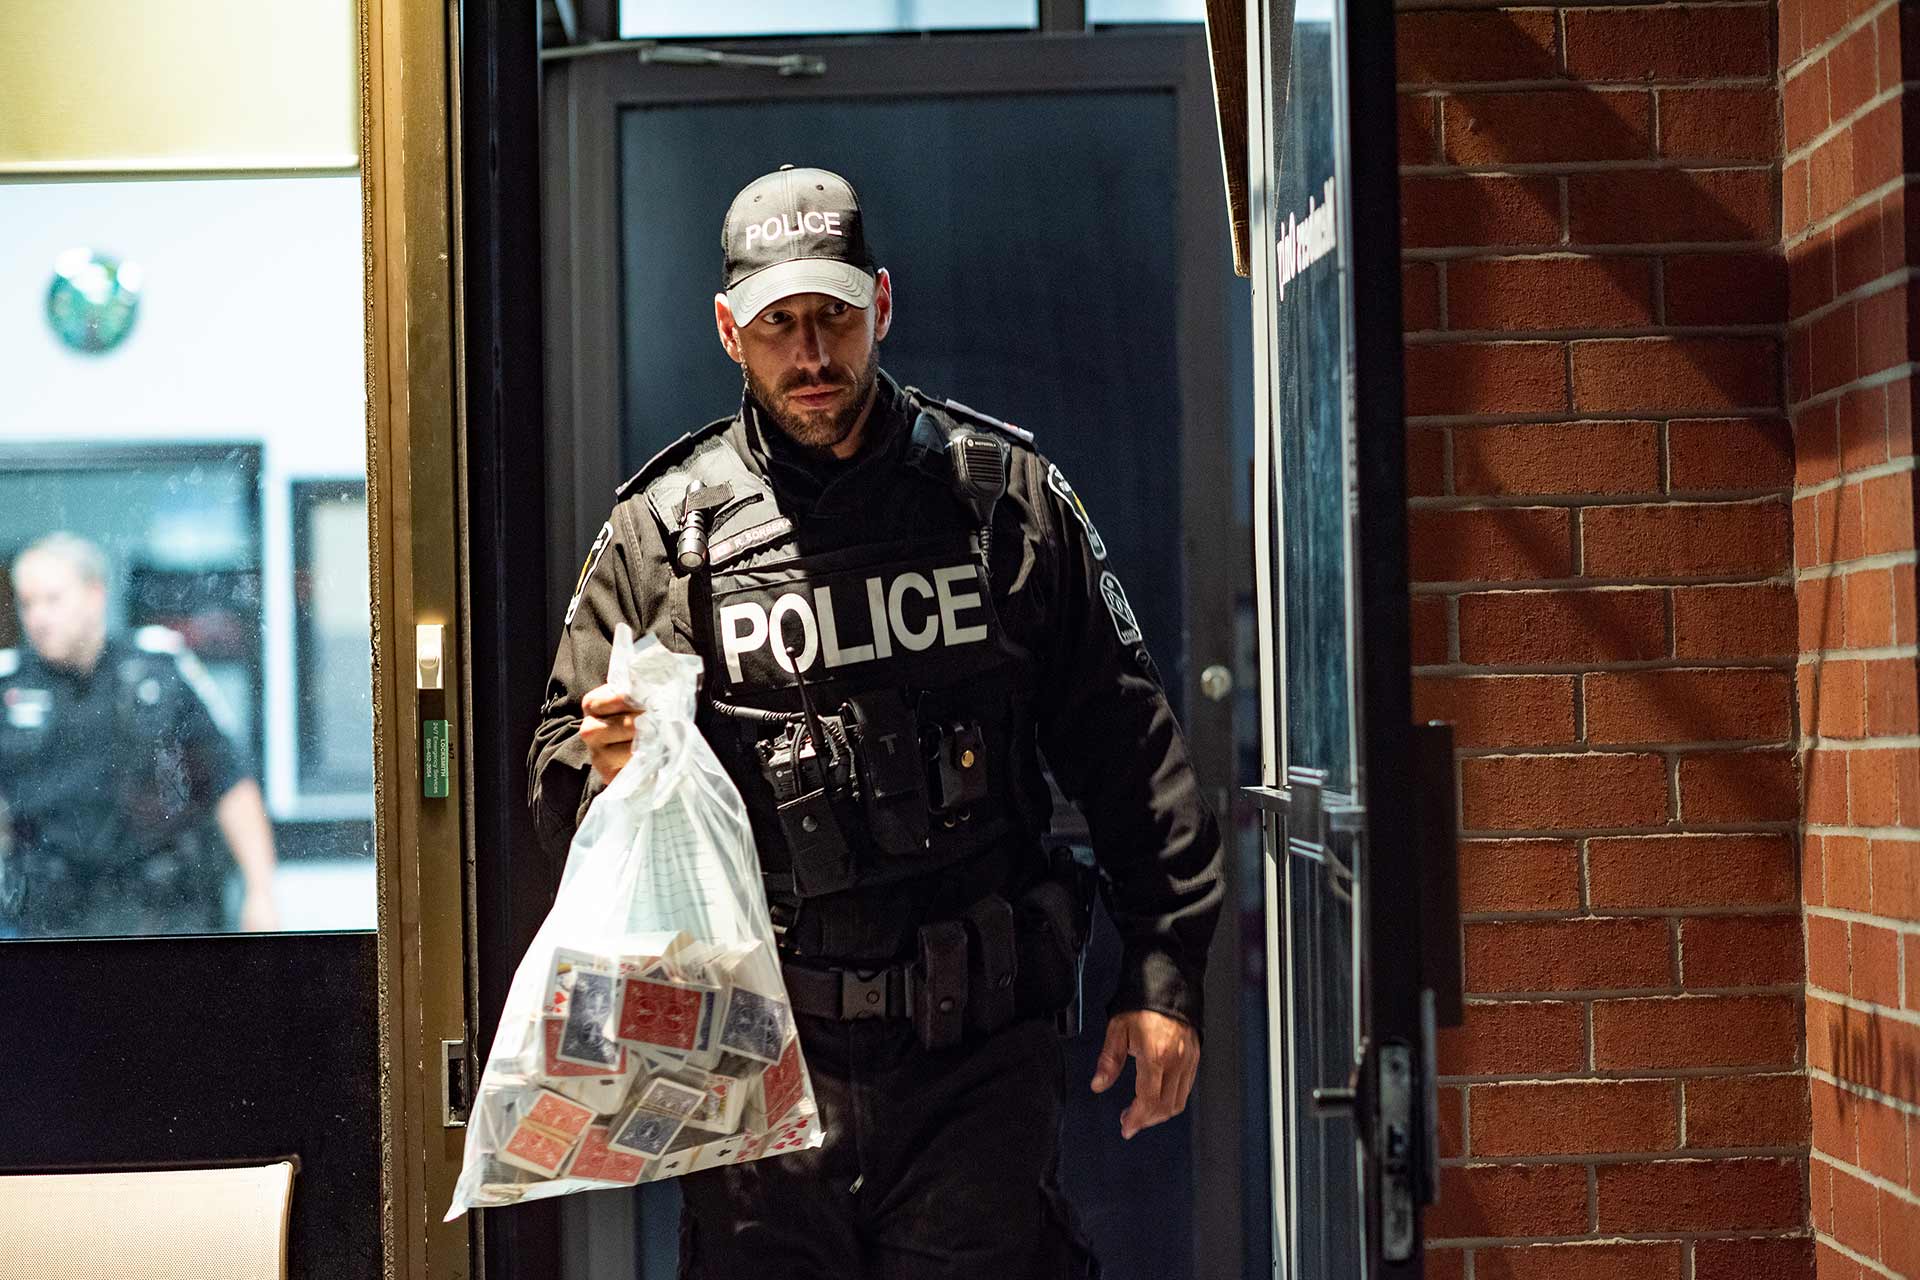 An officer emerges from a building holding alleged gambling paraphernalia qhiqhuiqrtiheinv